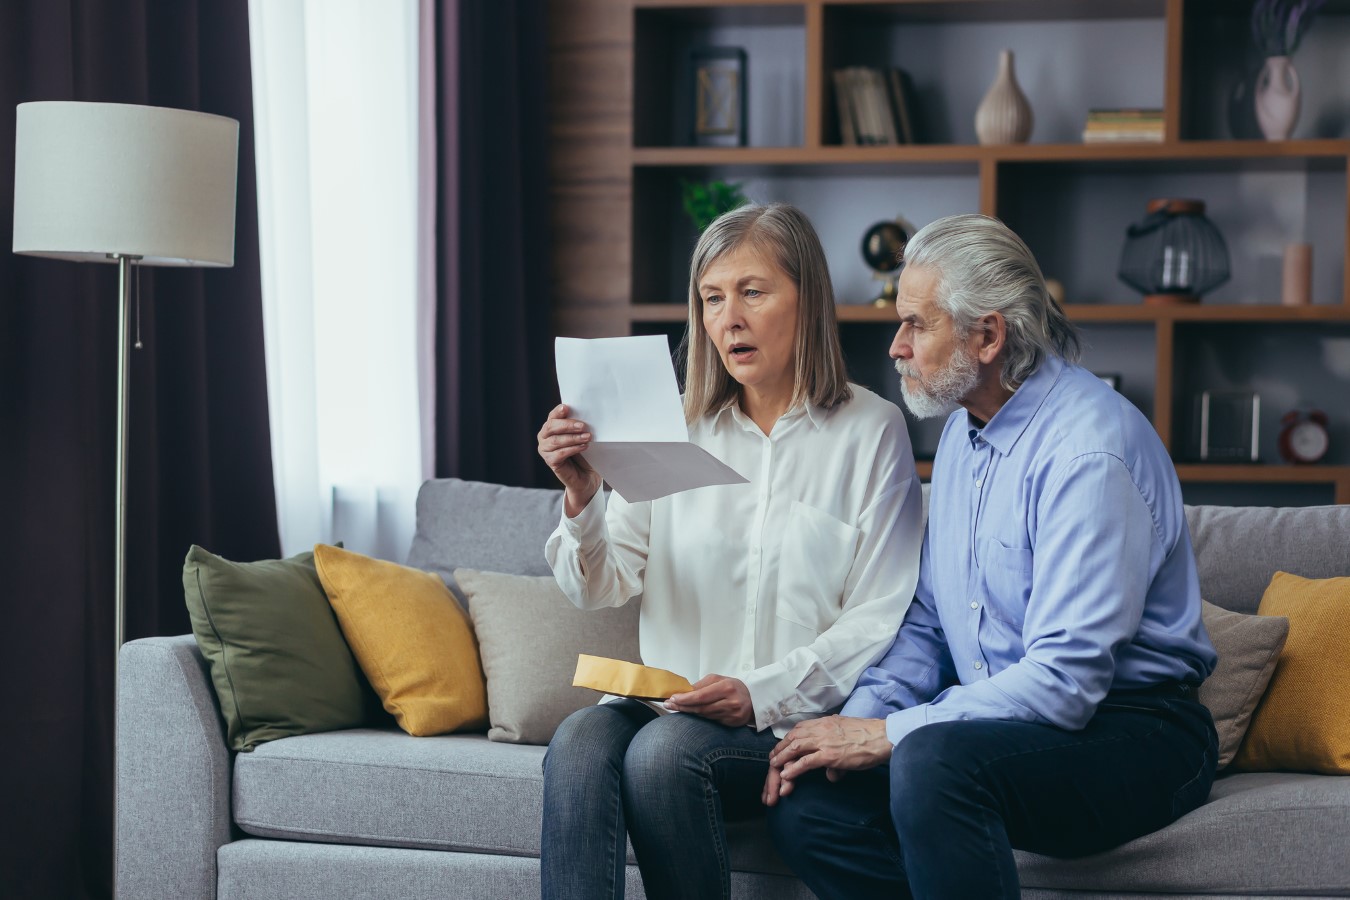 Angry frustrated document senior couple. Unhappy old family getting stressed. Serious older husband showing banking paper document bills taxes to confused elderly wife in home. Worried looking utility